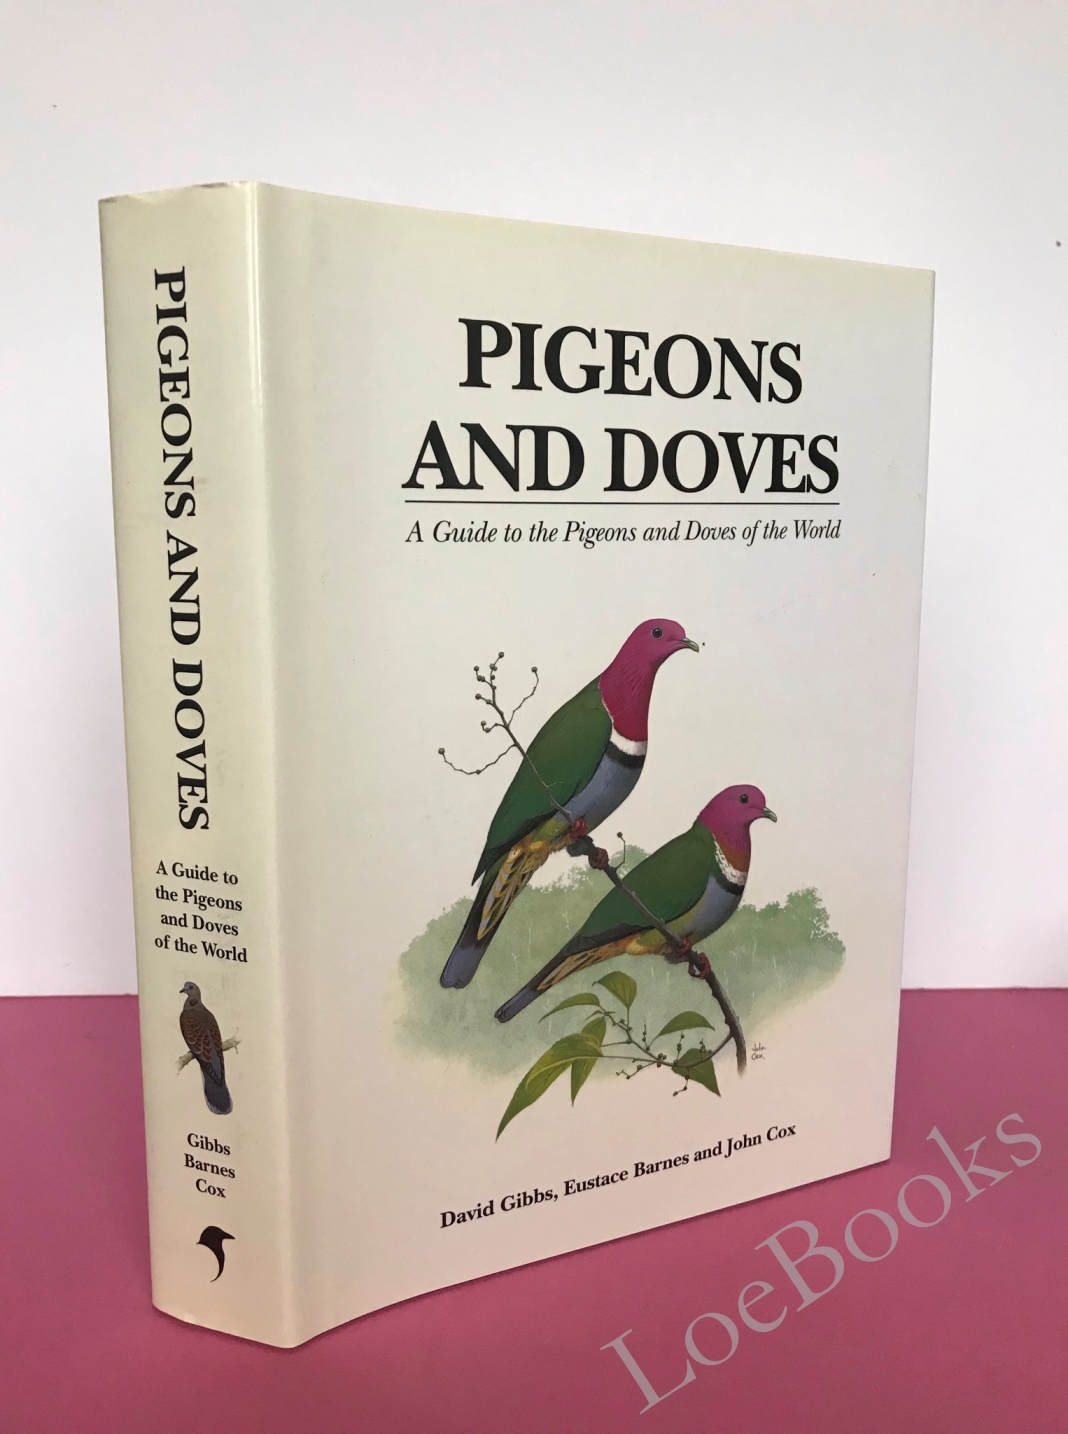 PIGEONS AND DOVES. A GUIDE TO THE PIGEON